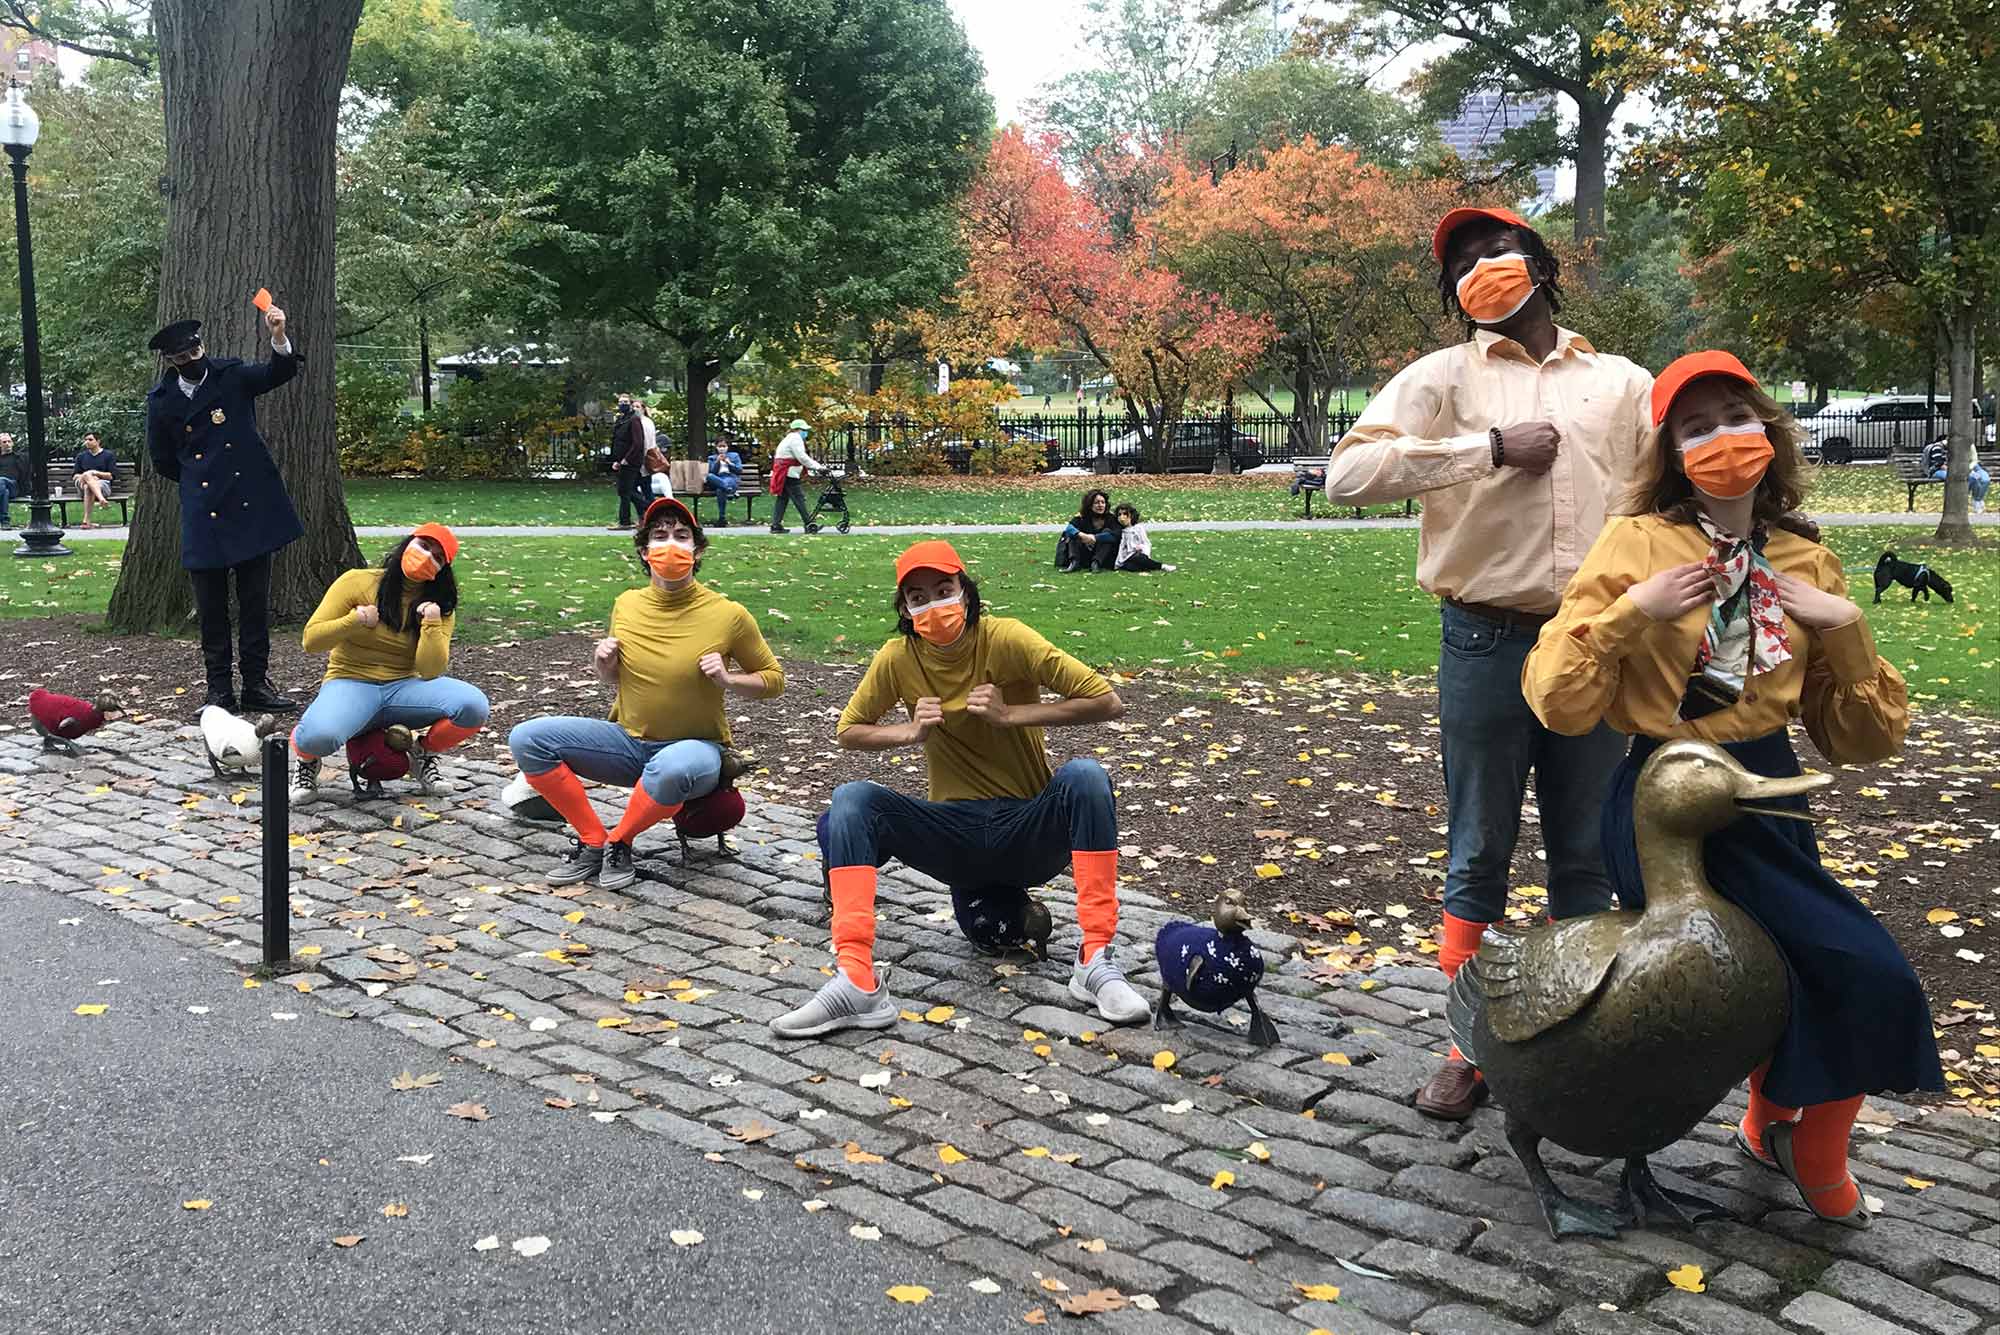 A photo of cast members sitting on the Make Way for Ducklings sculpture in the Boston Public Garden